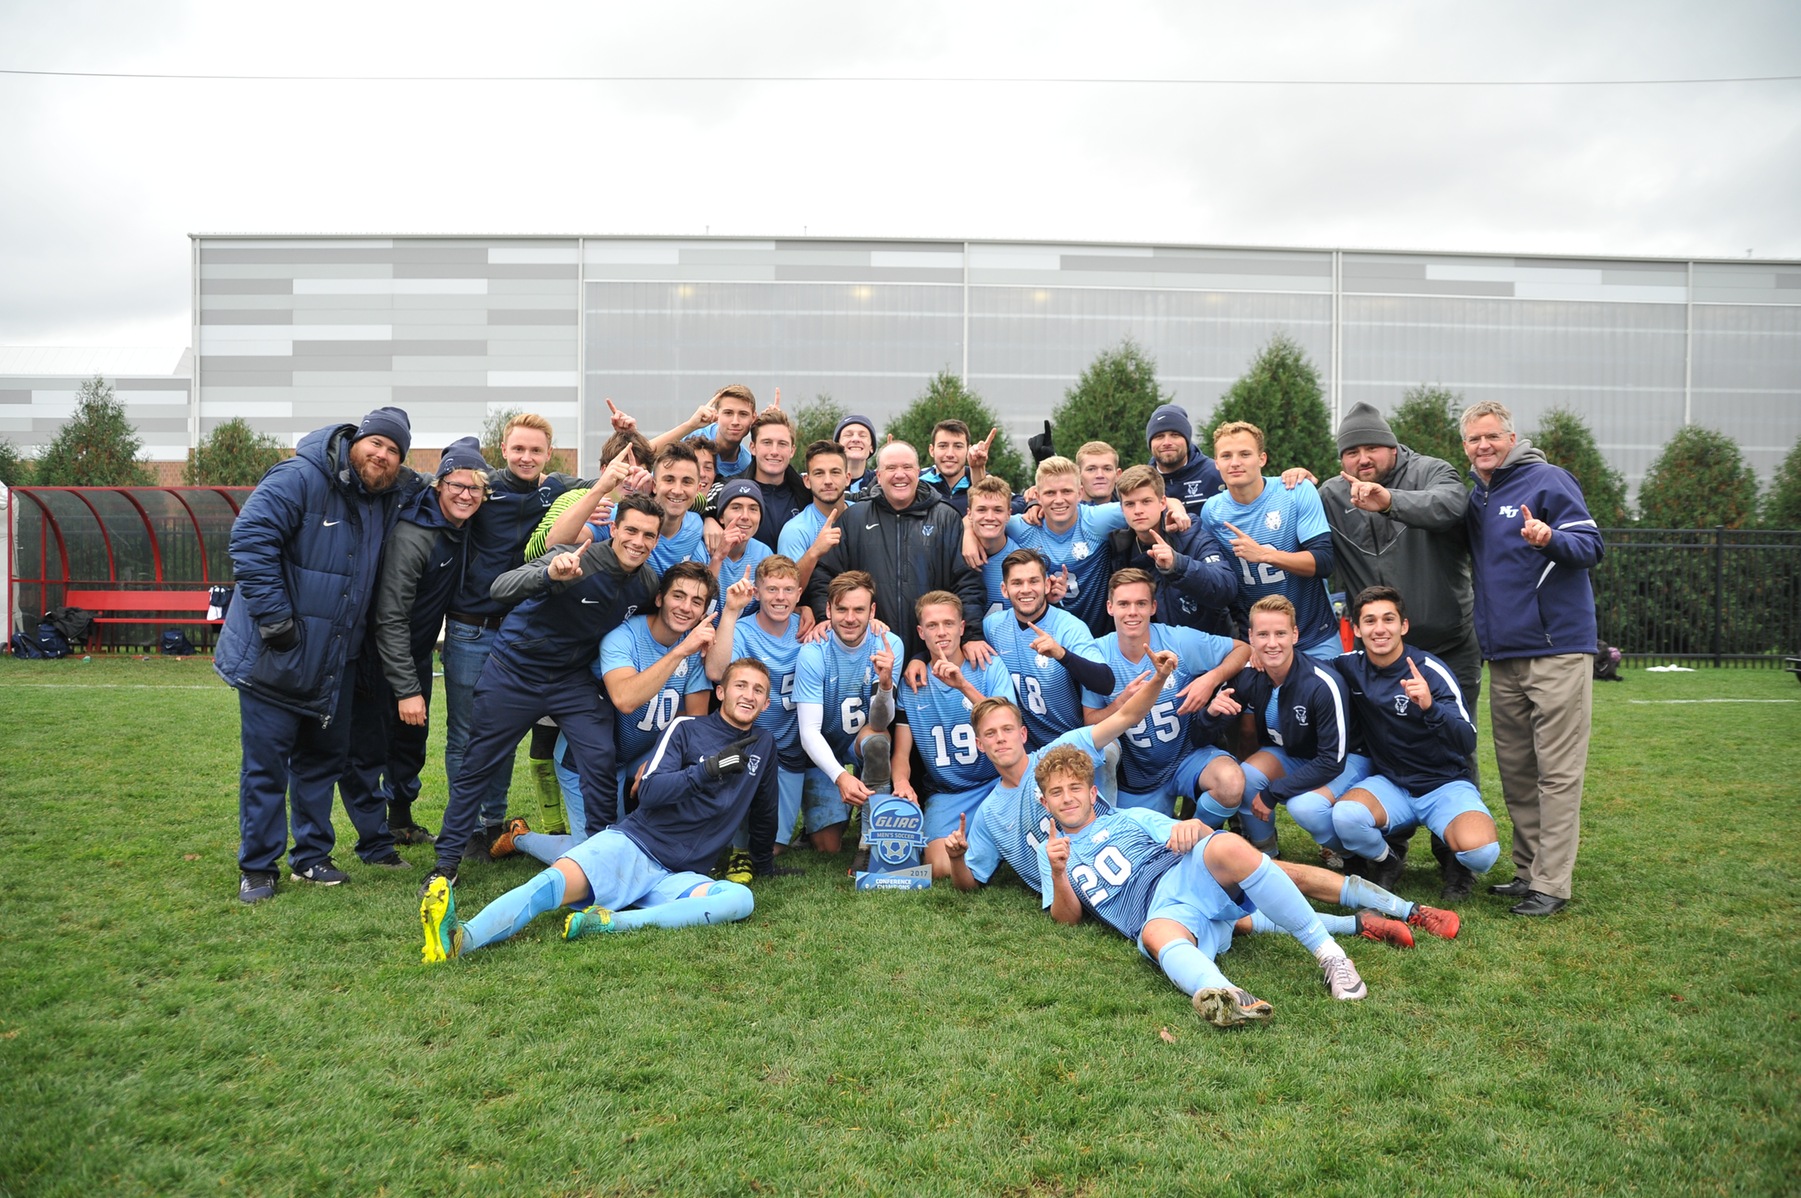 GLIAC CHAMPIONS! Men's Soccer Shuts Out No. 16 Saginaw Valley 1-0 For League Title